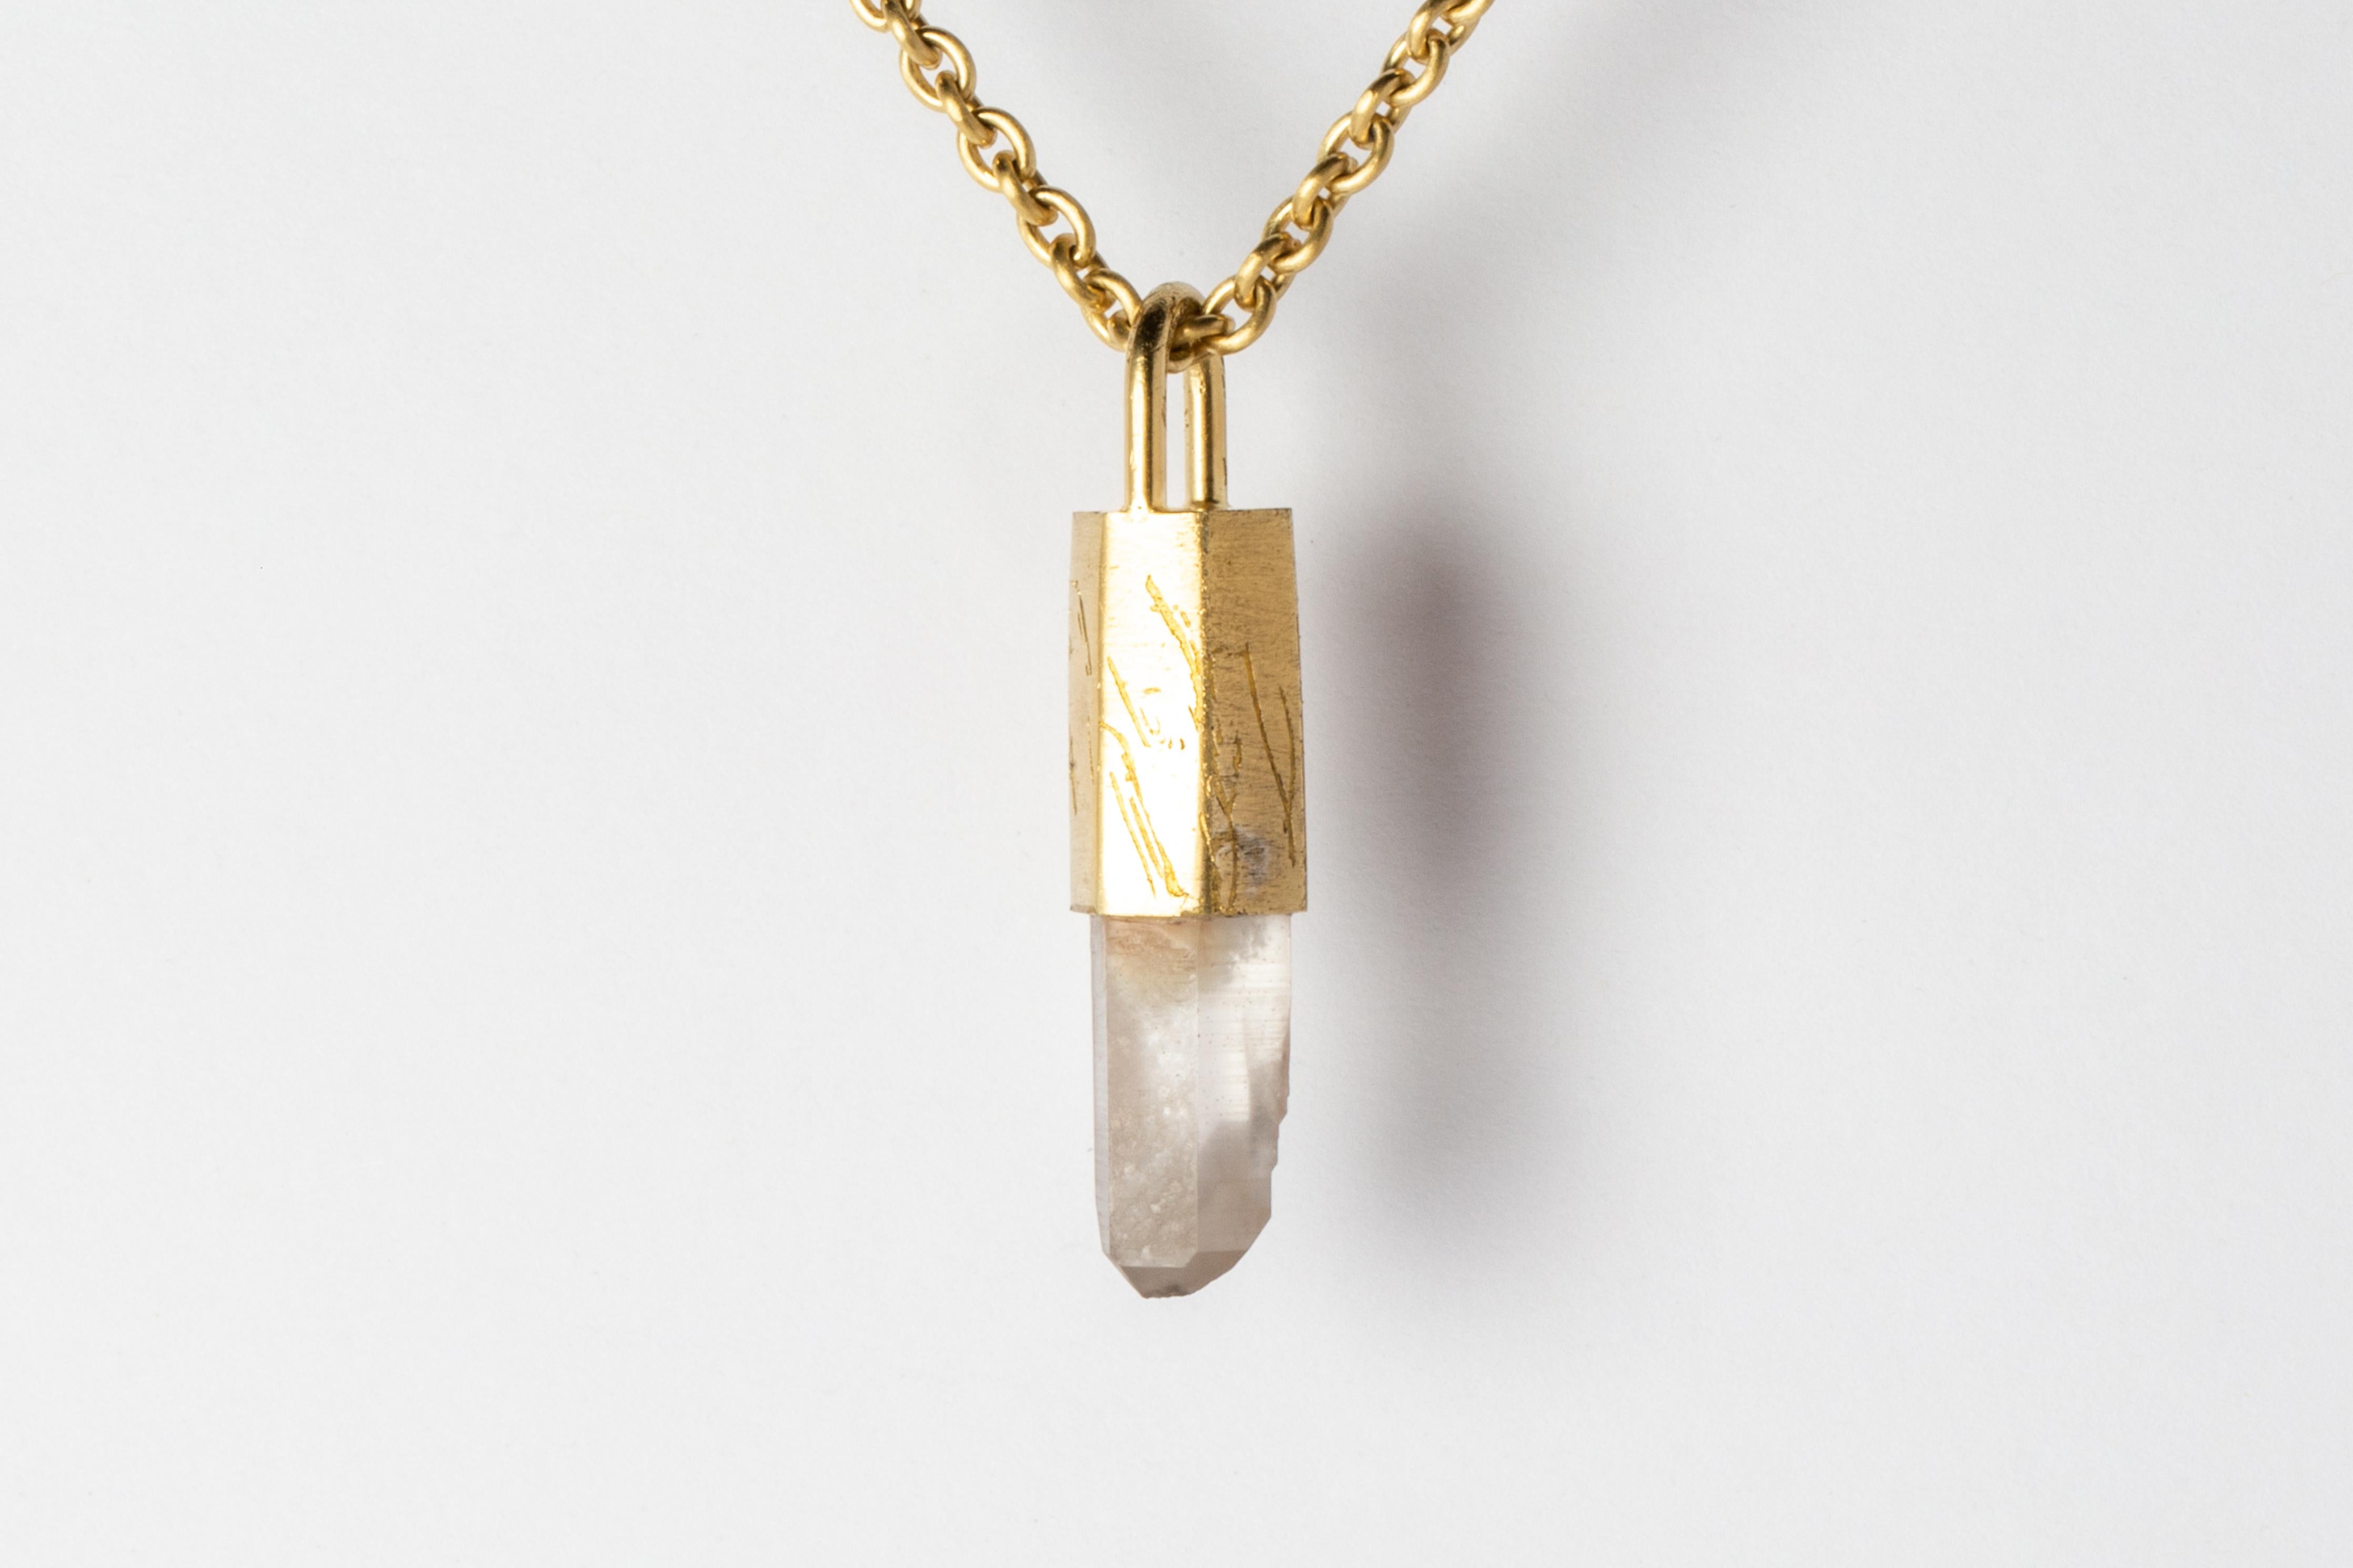 Talisman Necklace (Misc. Quartz, AG+AGA+QQ) In New Condition For Sale In Hong Kong, Hong Kong Island